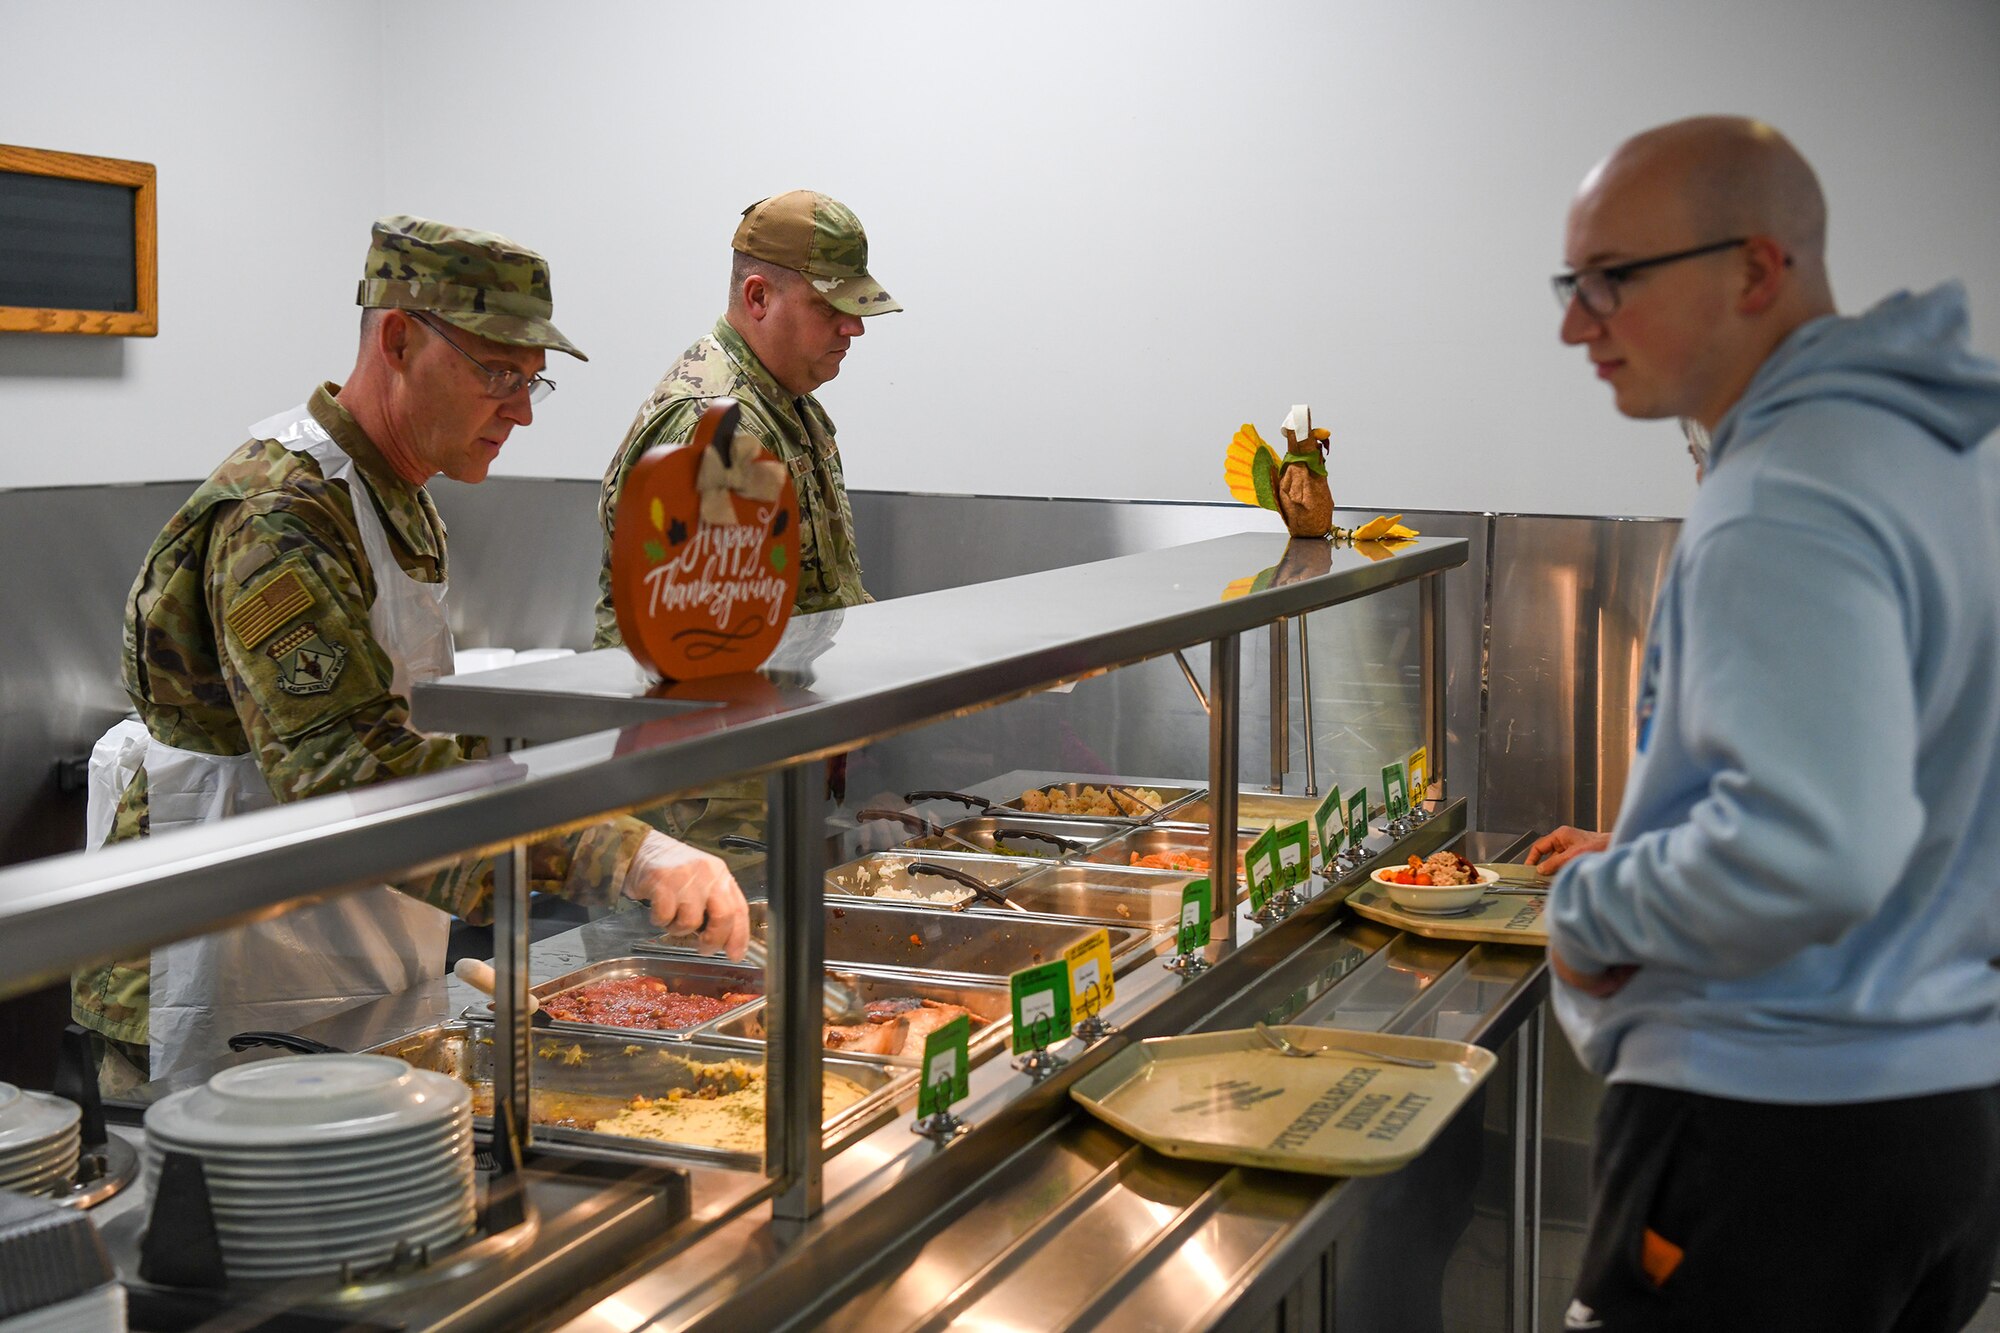 Chief Master Sgt. Christopher Williams., 445th Airlift Wing command chief, serves lunch alongside Staff Sgt. Brian Snell, 445th Force Support Squadron services flight, to Airman at the Pitsenbarger Dining Facility, Wright-Patterson Air Force Base, Ohio, Nov 6, 2022. Commanders, first sergeants and chiefs serve Airmen at the dining facility during November unit training assemblies to show their appreciation for their service.